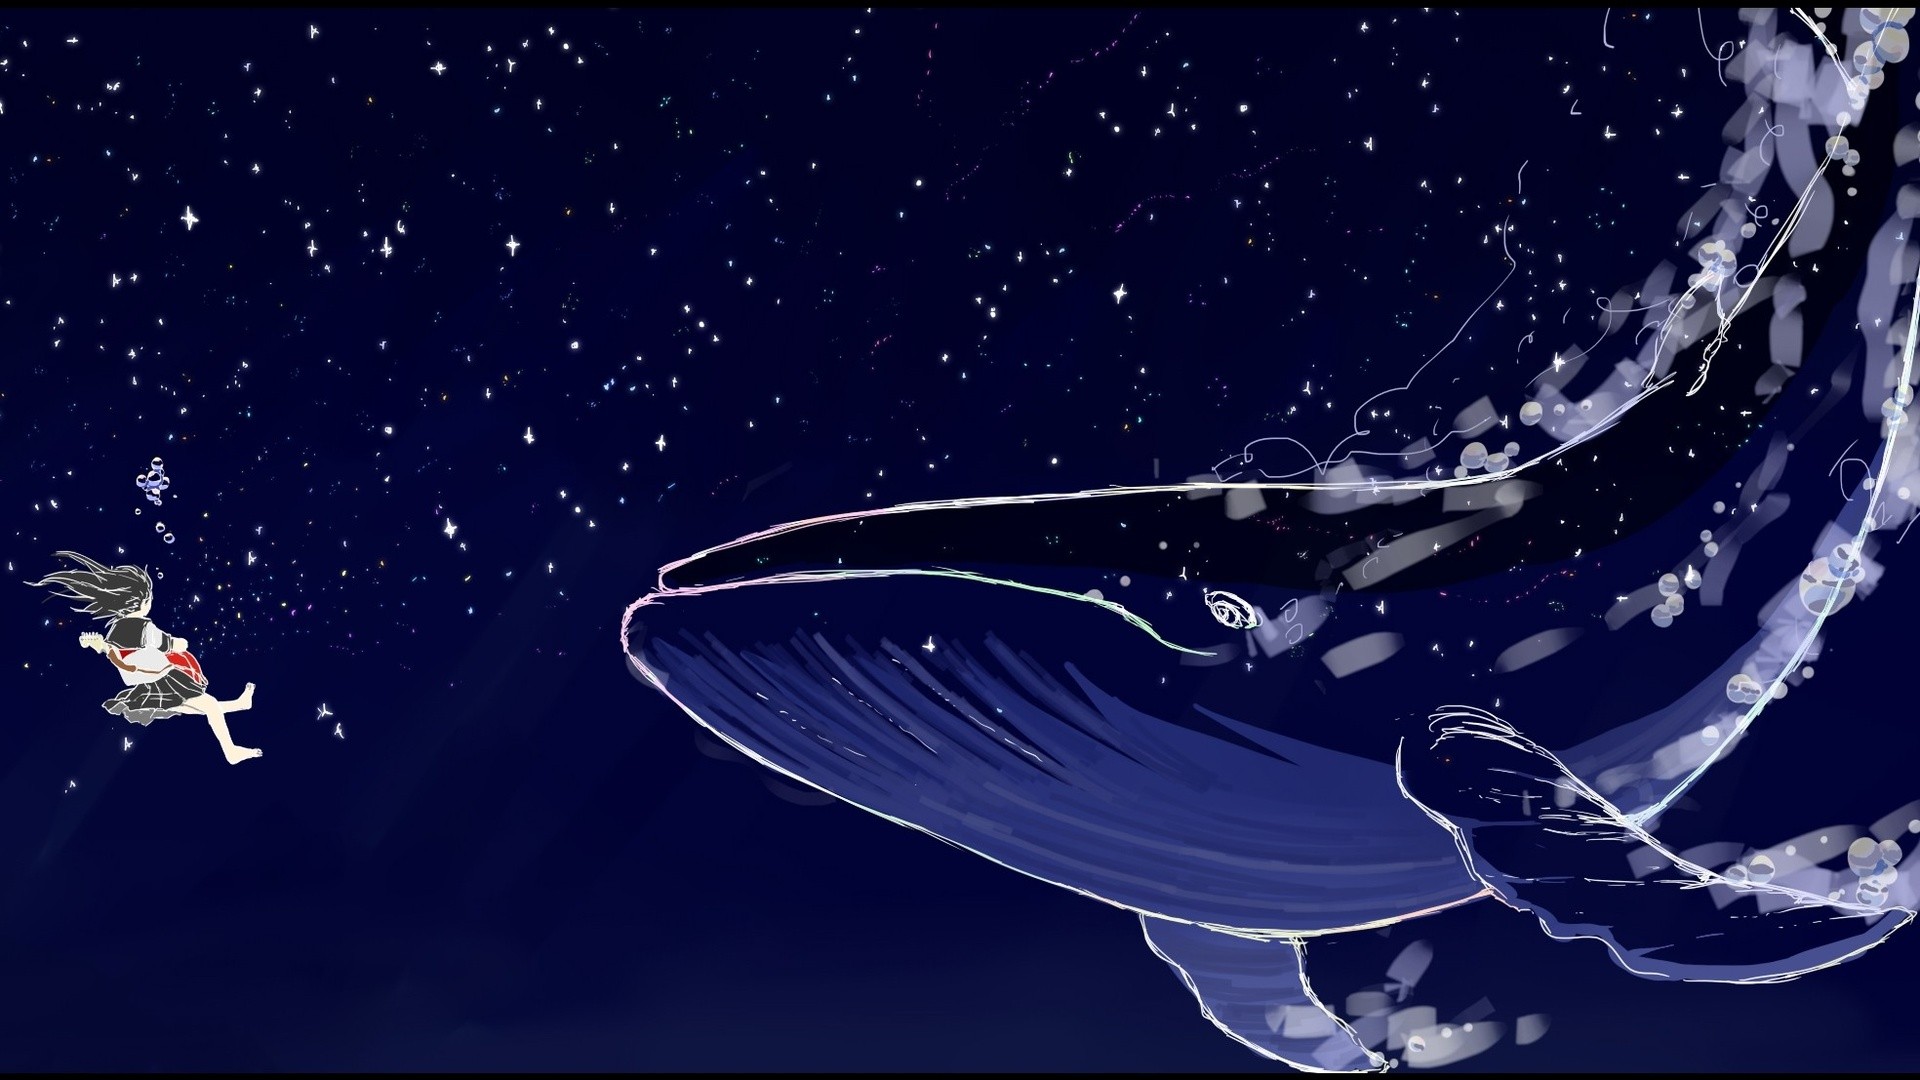 Flying Whale background picture